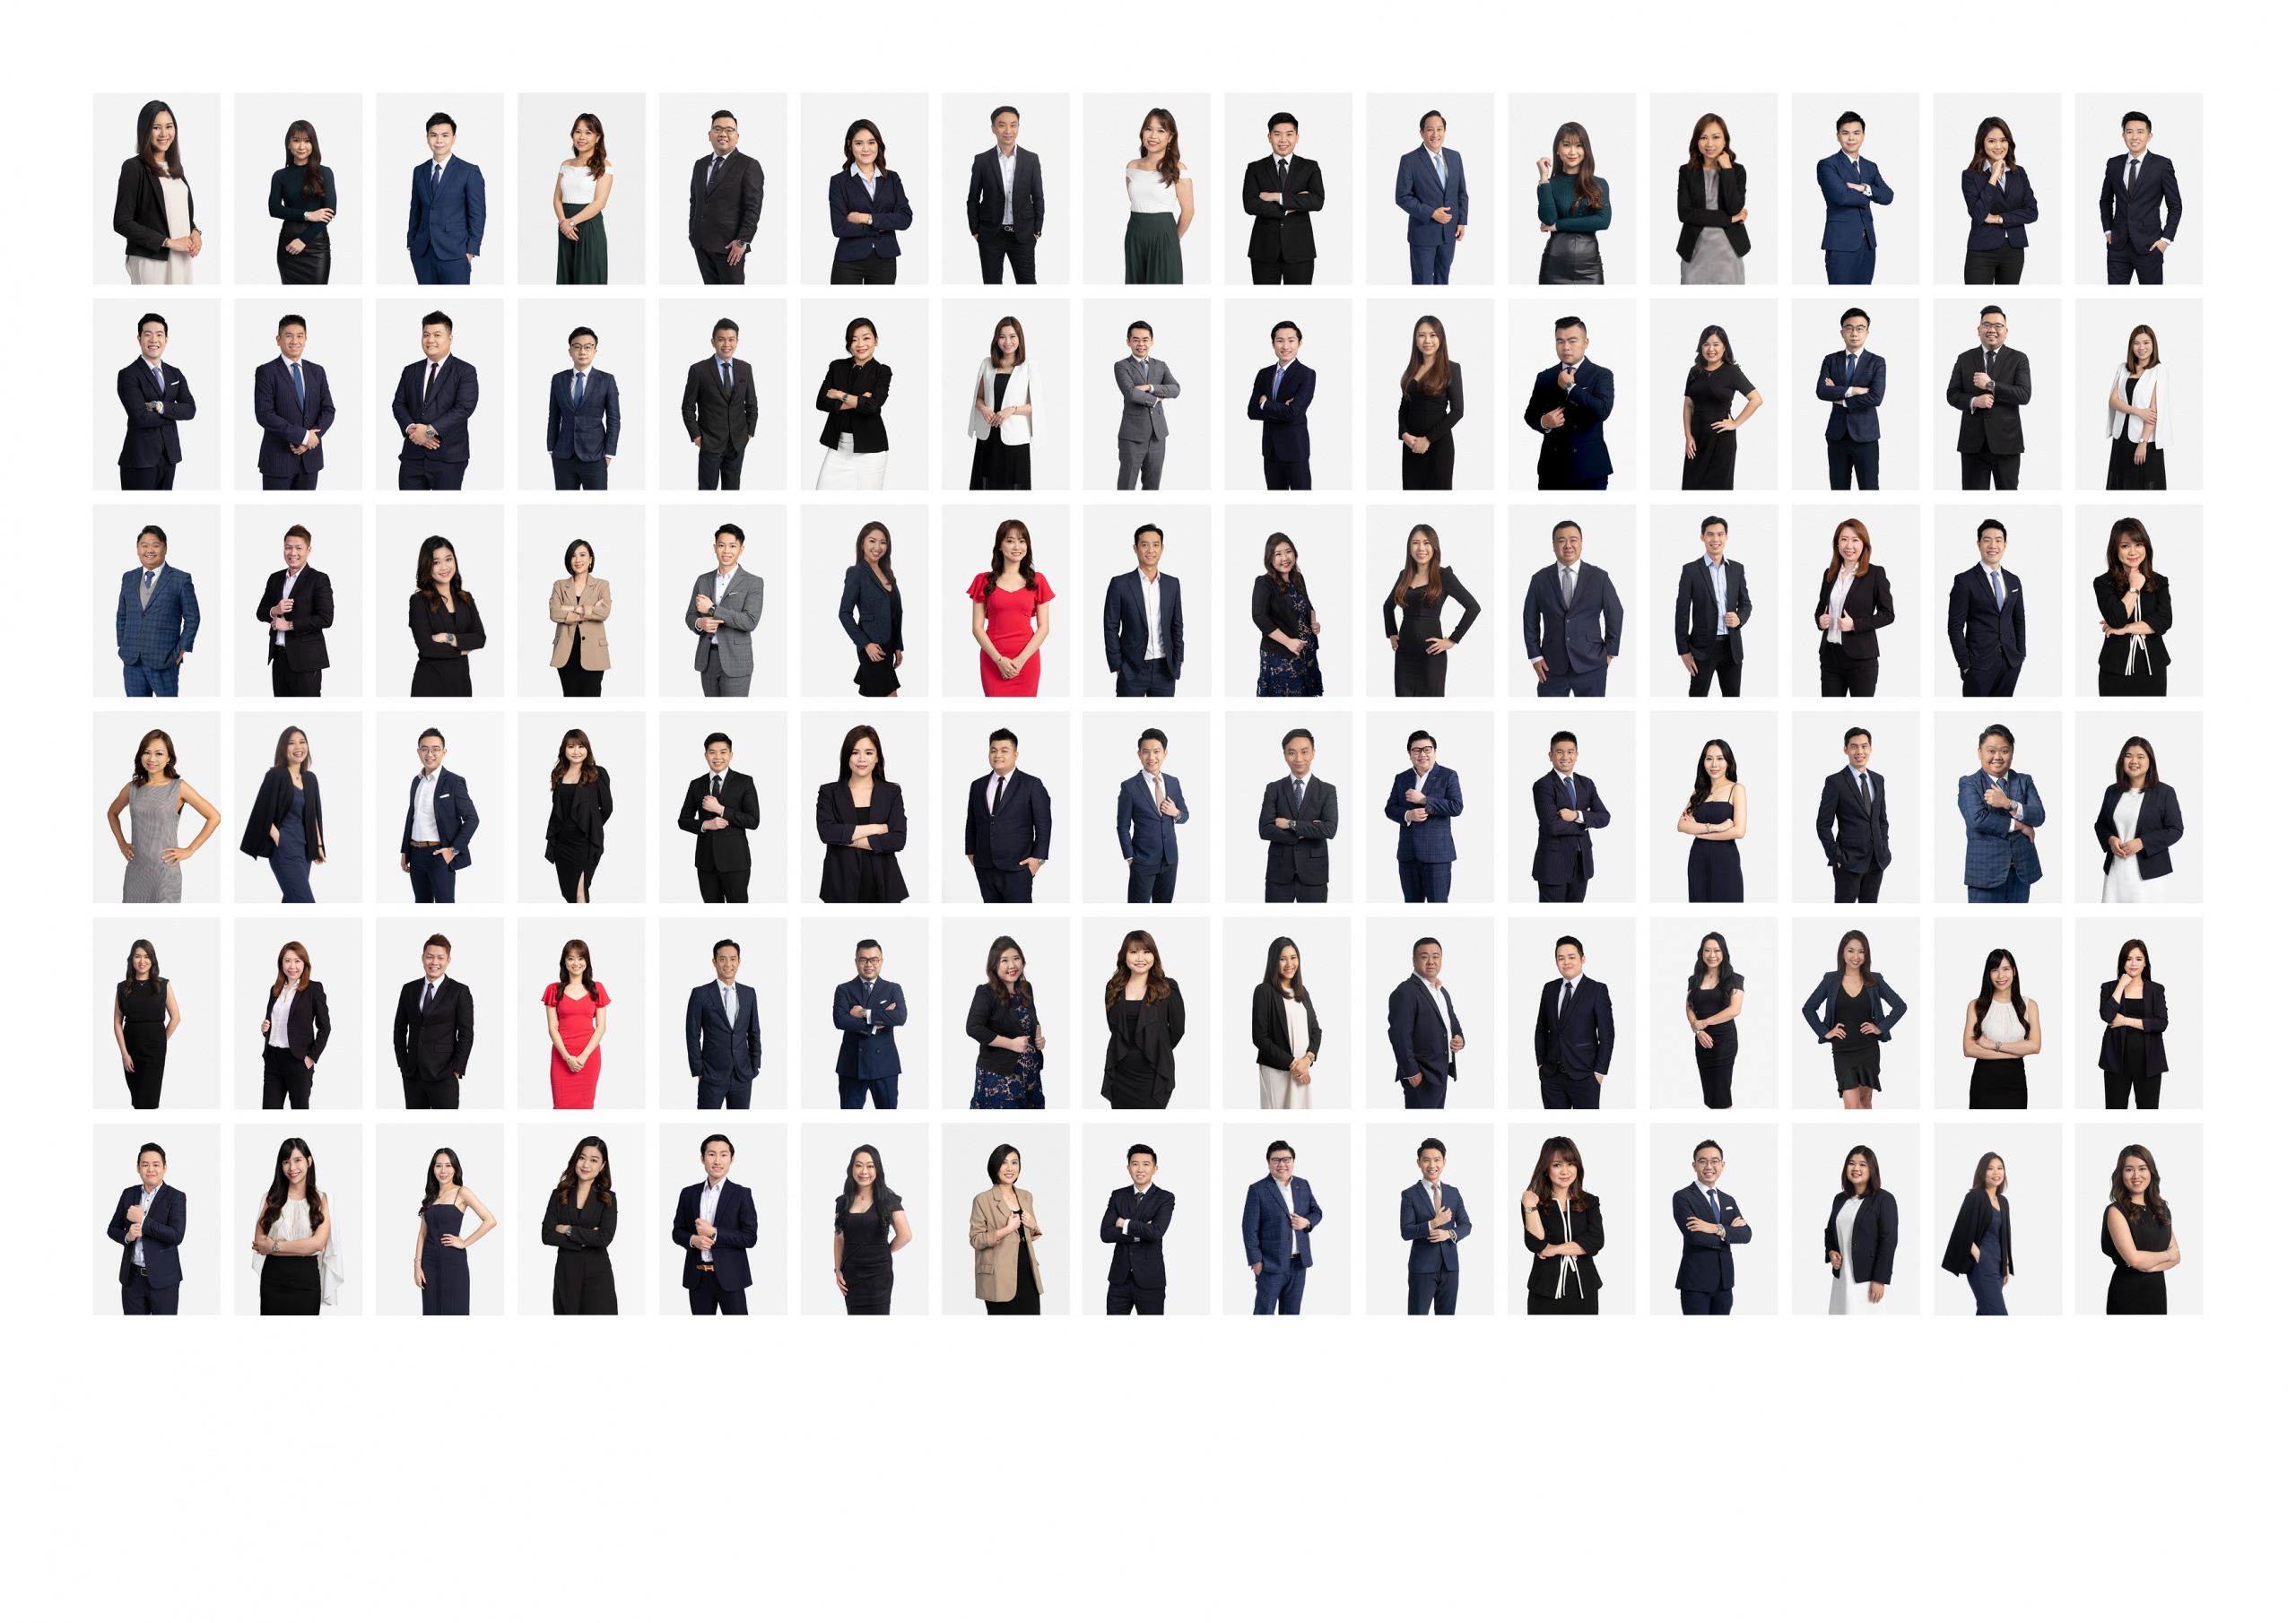 group corporate headshot compiled grid